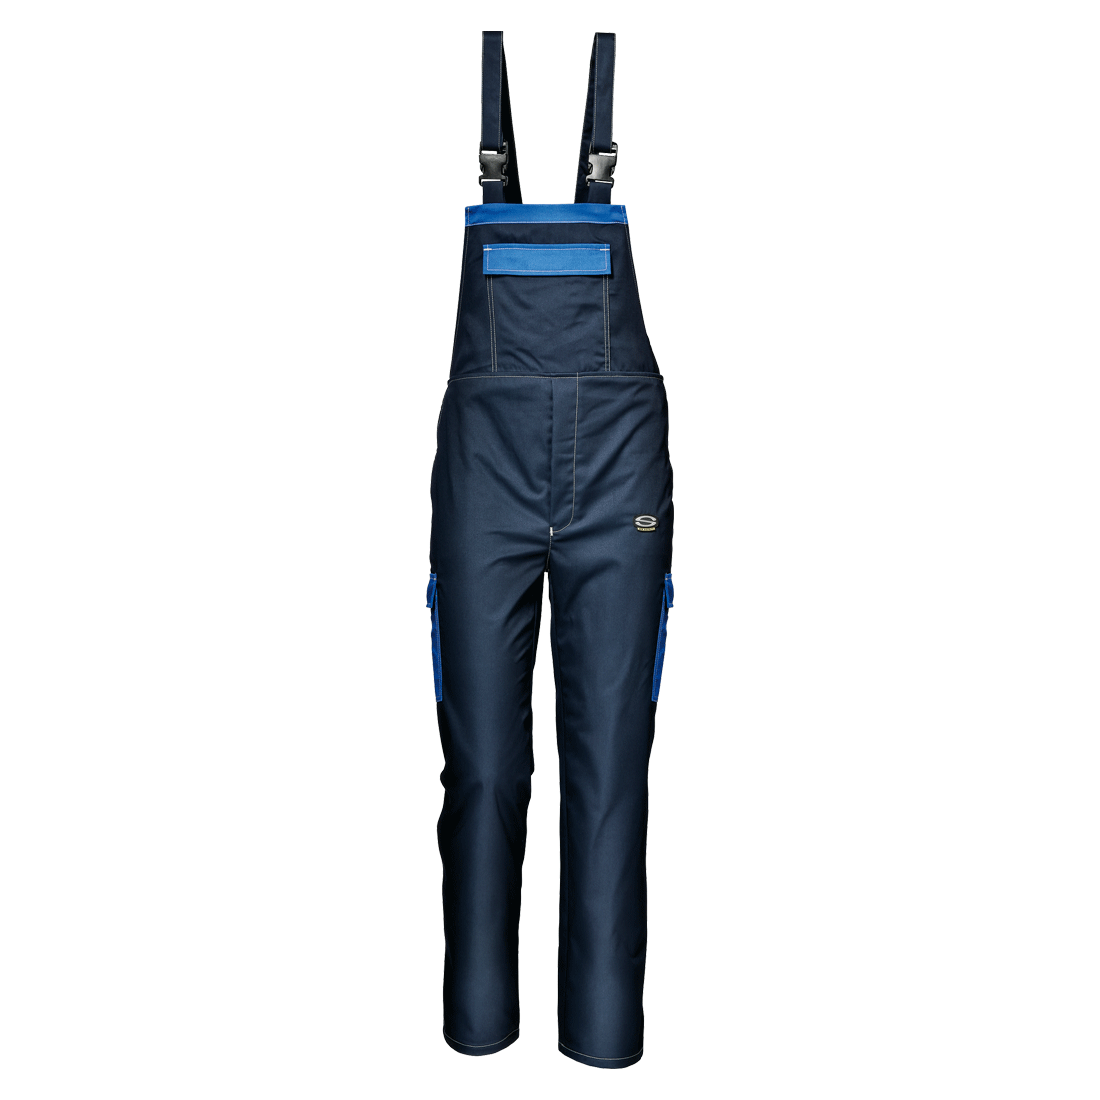 Sir Safety System | & coveralls pants Work bib